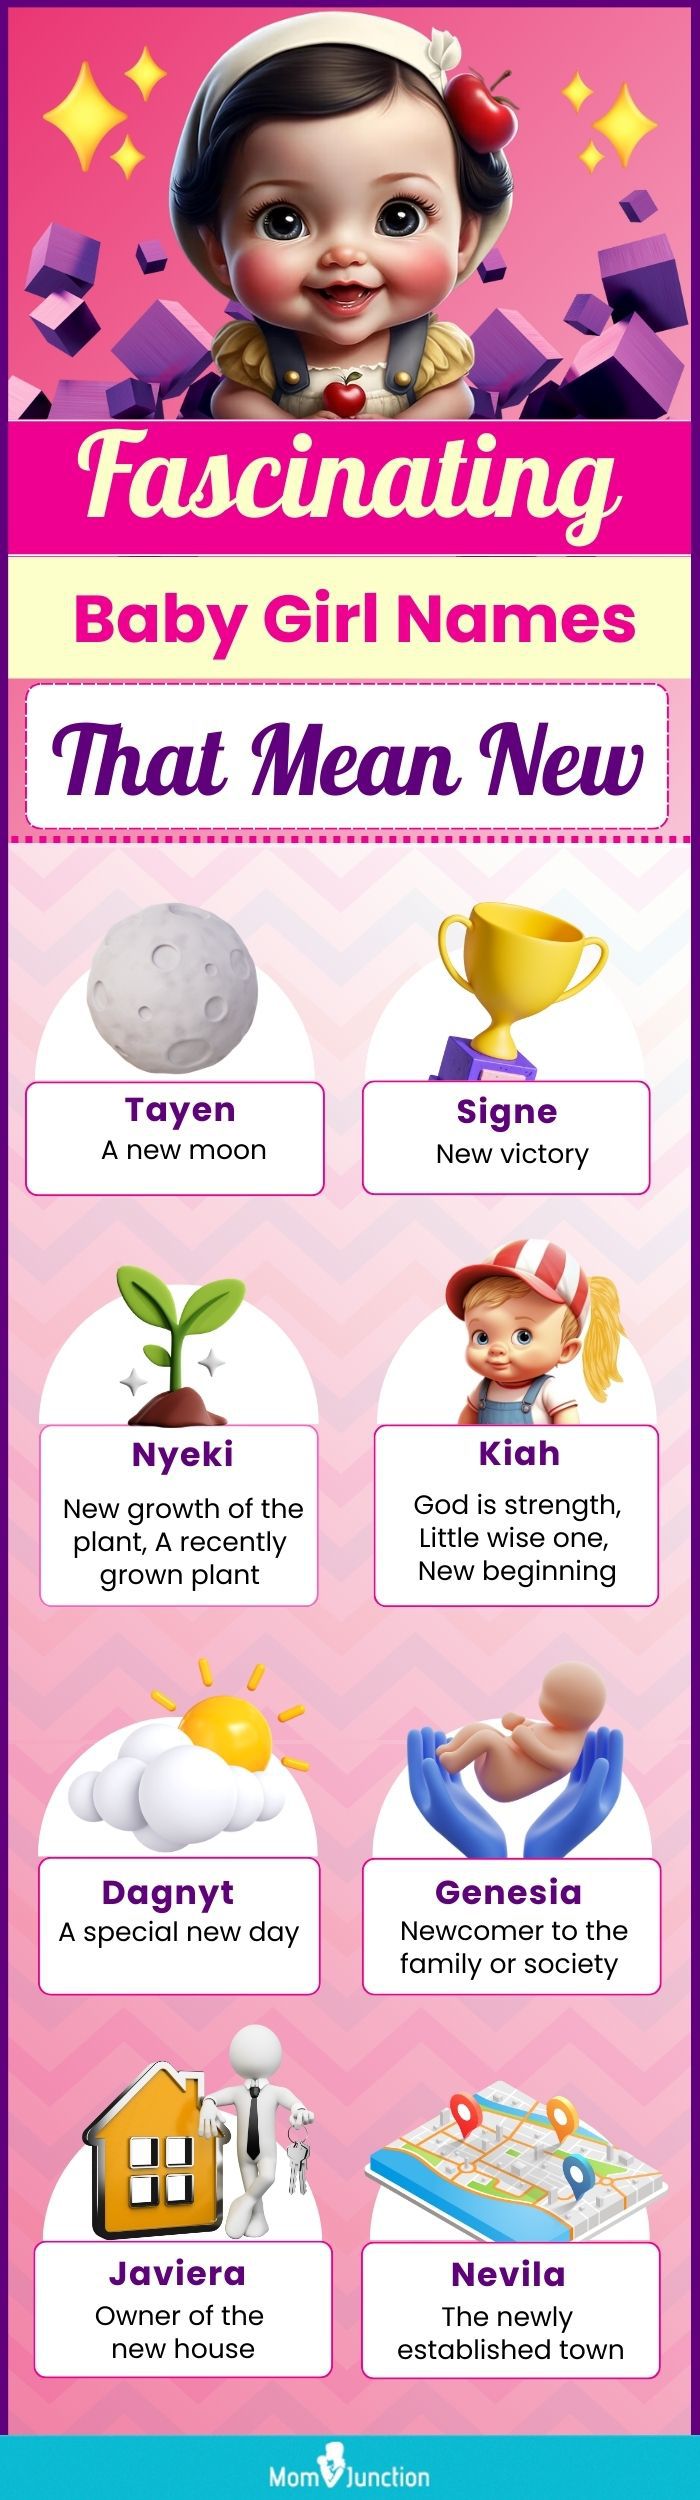 fascinating baby girl names that mean new (infographic)